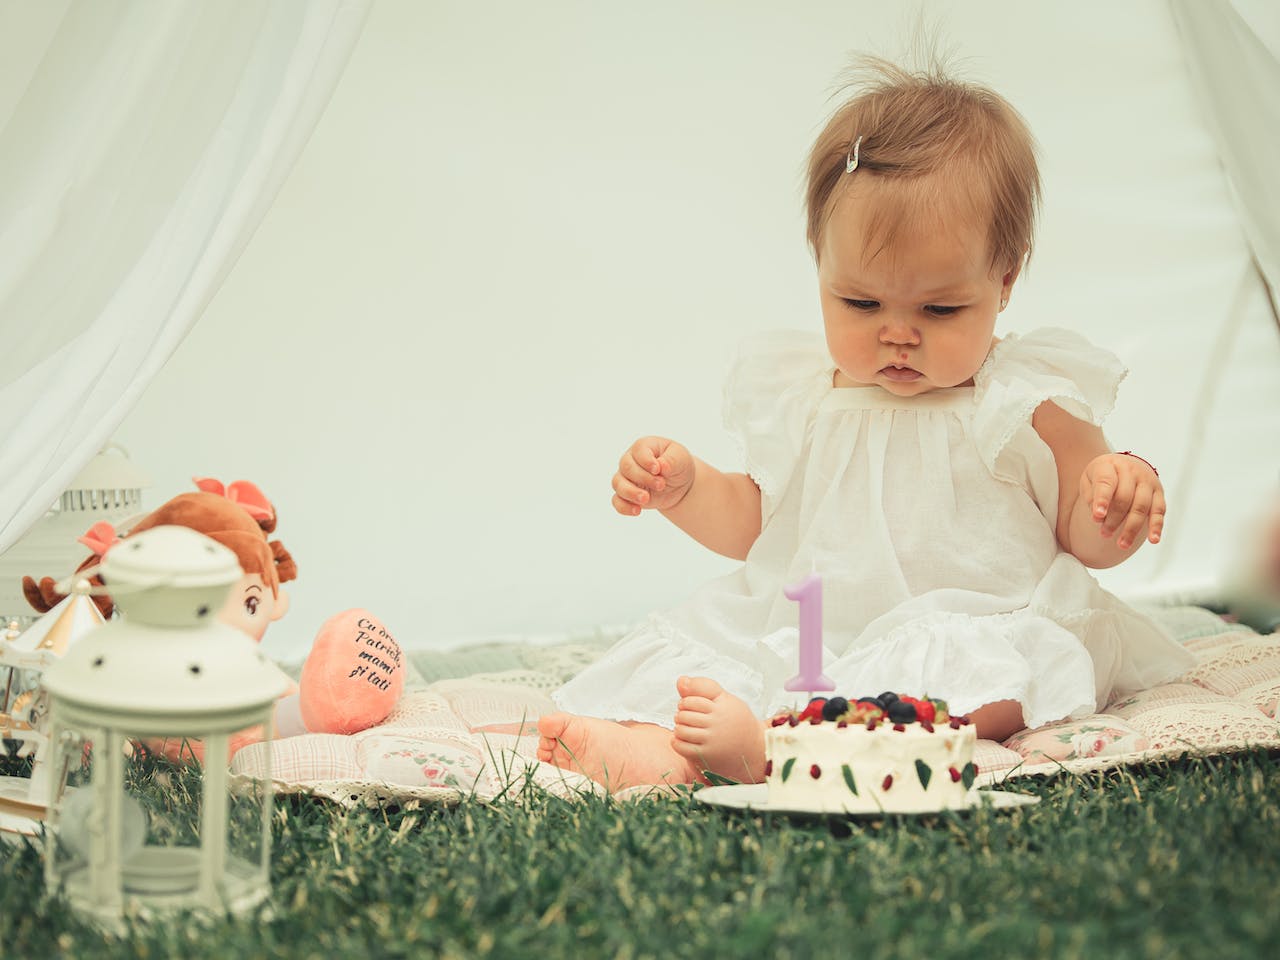 A Cute Baby Looking at the Cake